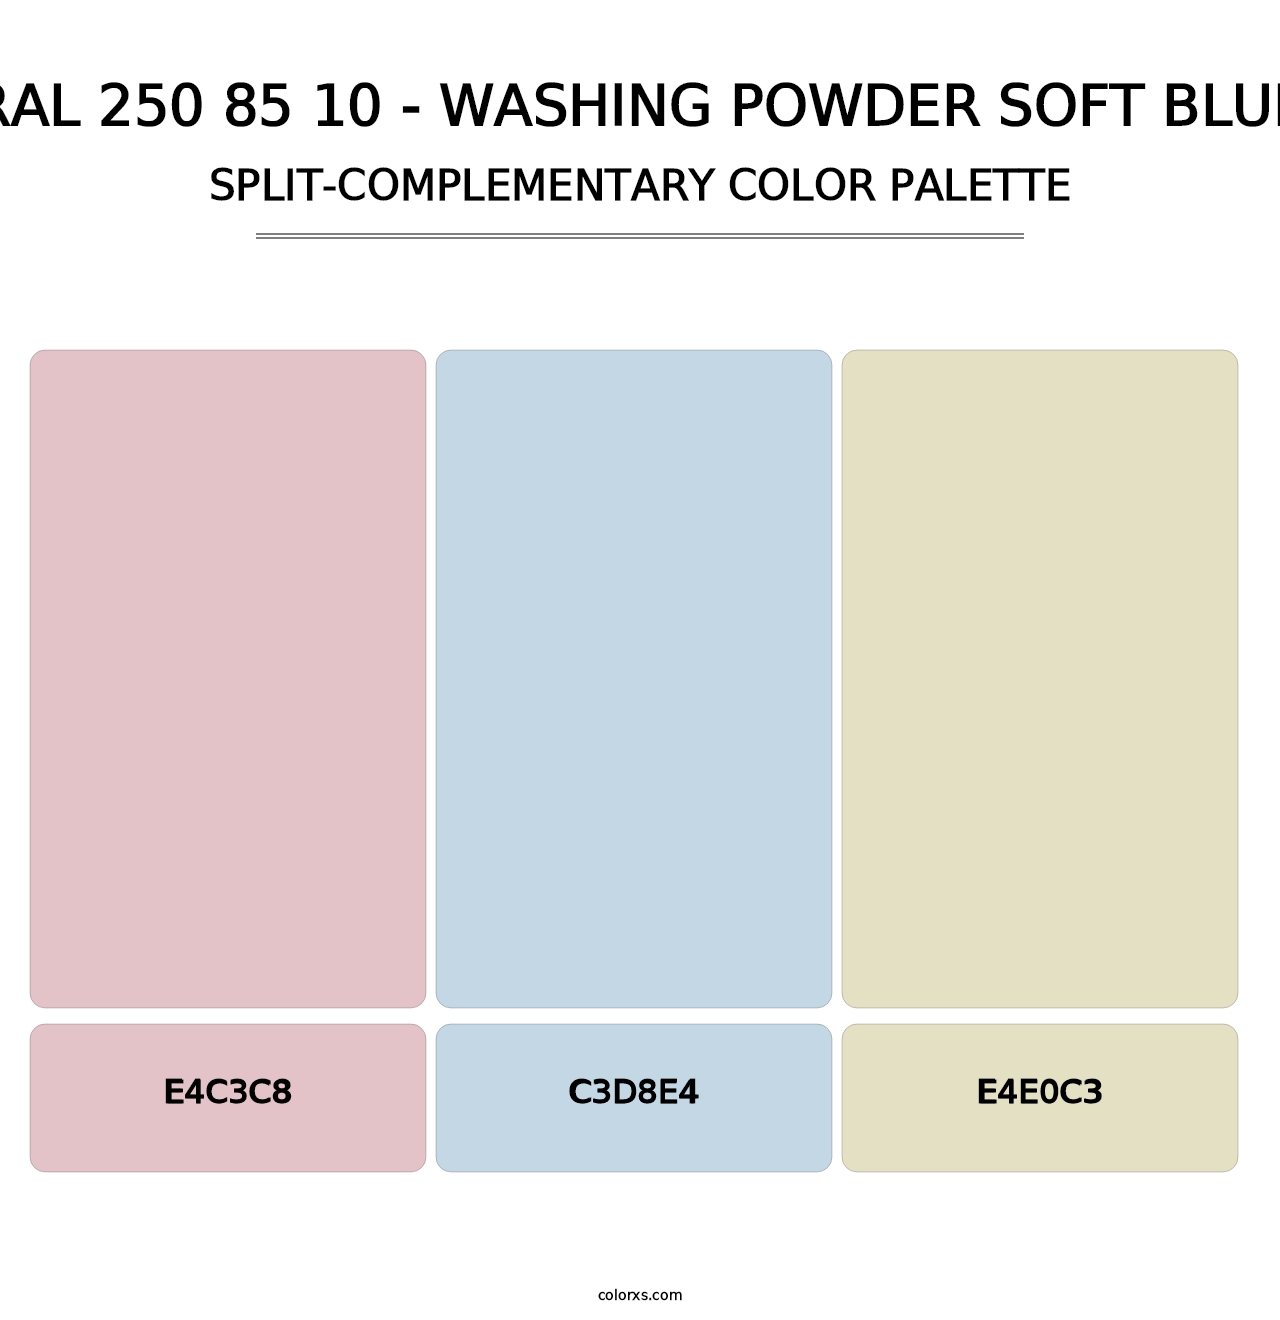 RAL 250 85 10 - Washing Powder Soft Blue - Split-Complementary Color Palette